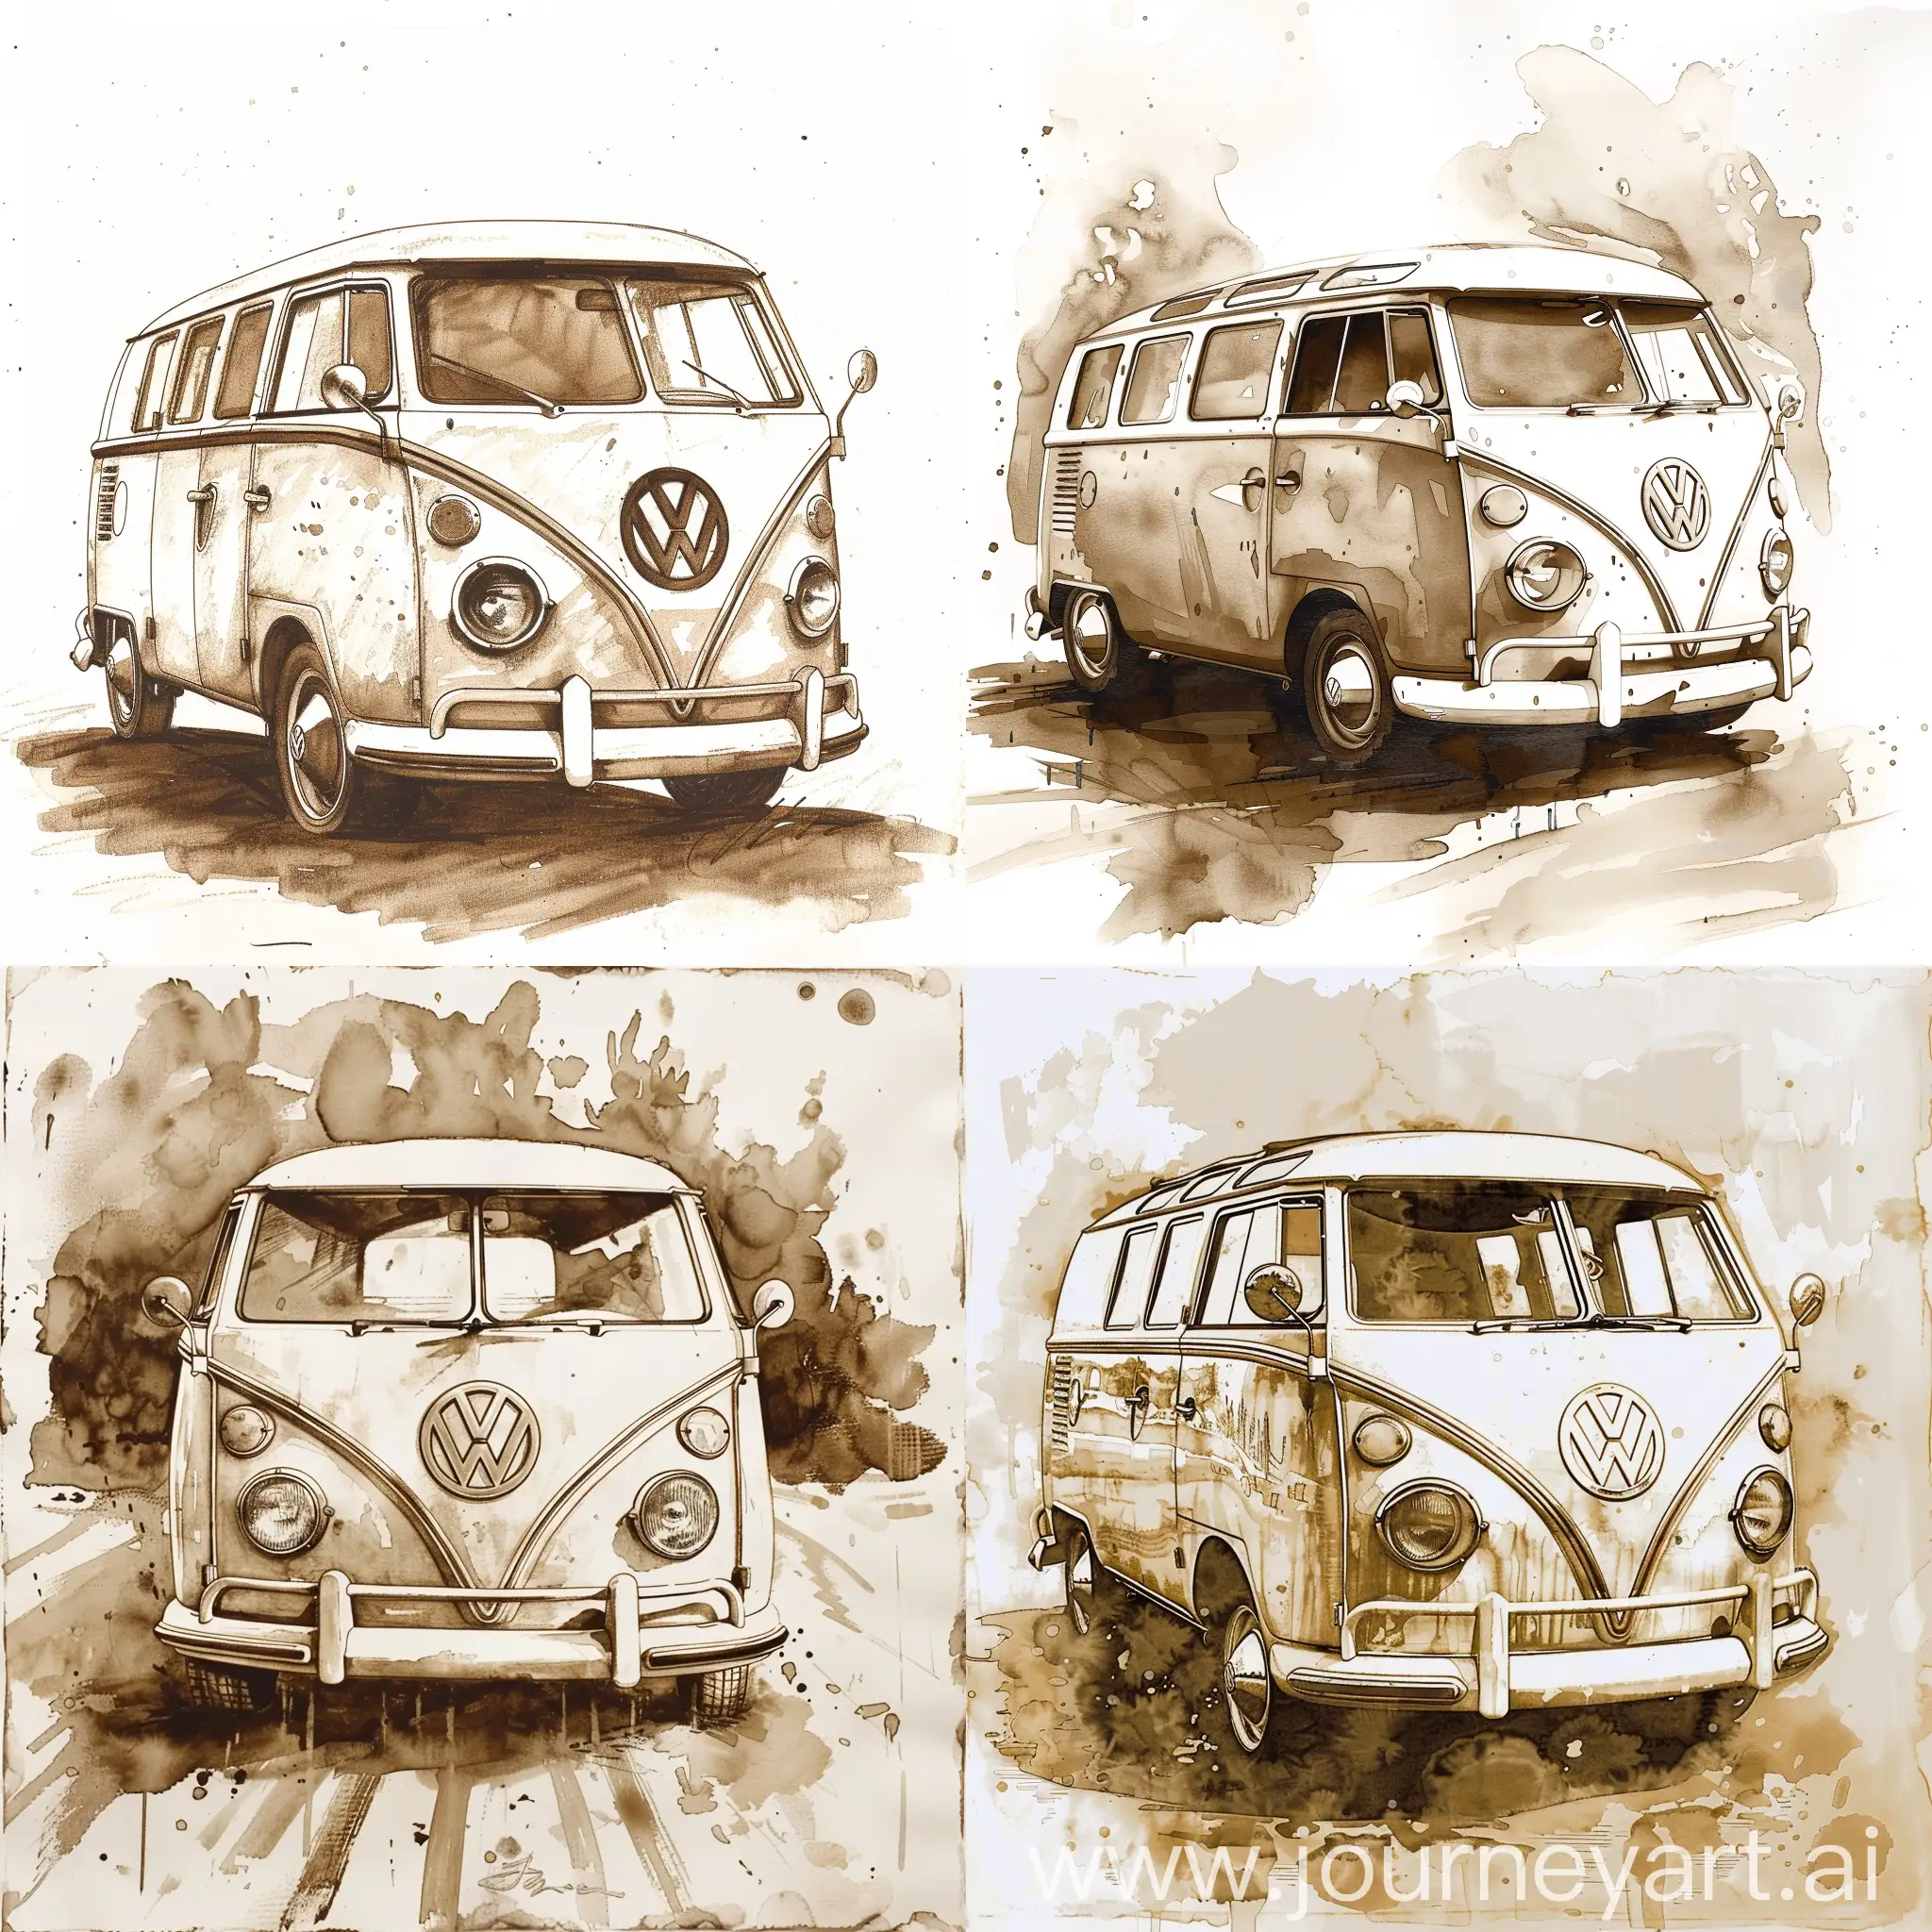 Vintage-VW-Beetle-Sketch-in-Sepia-and-White